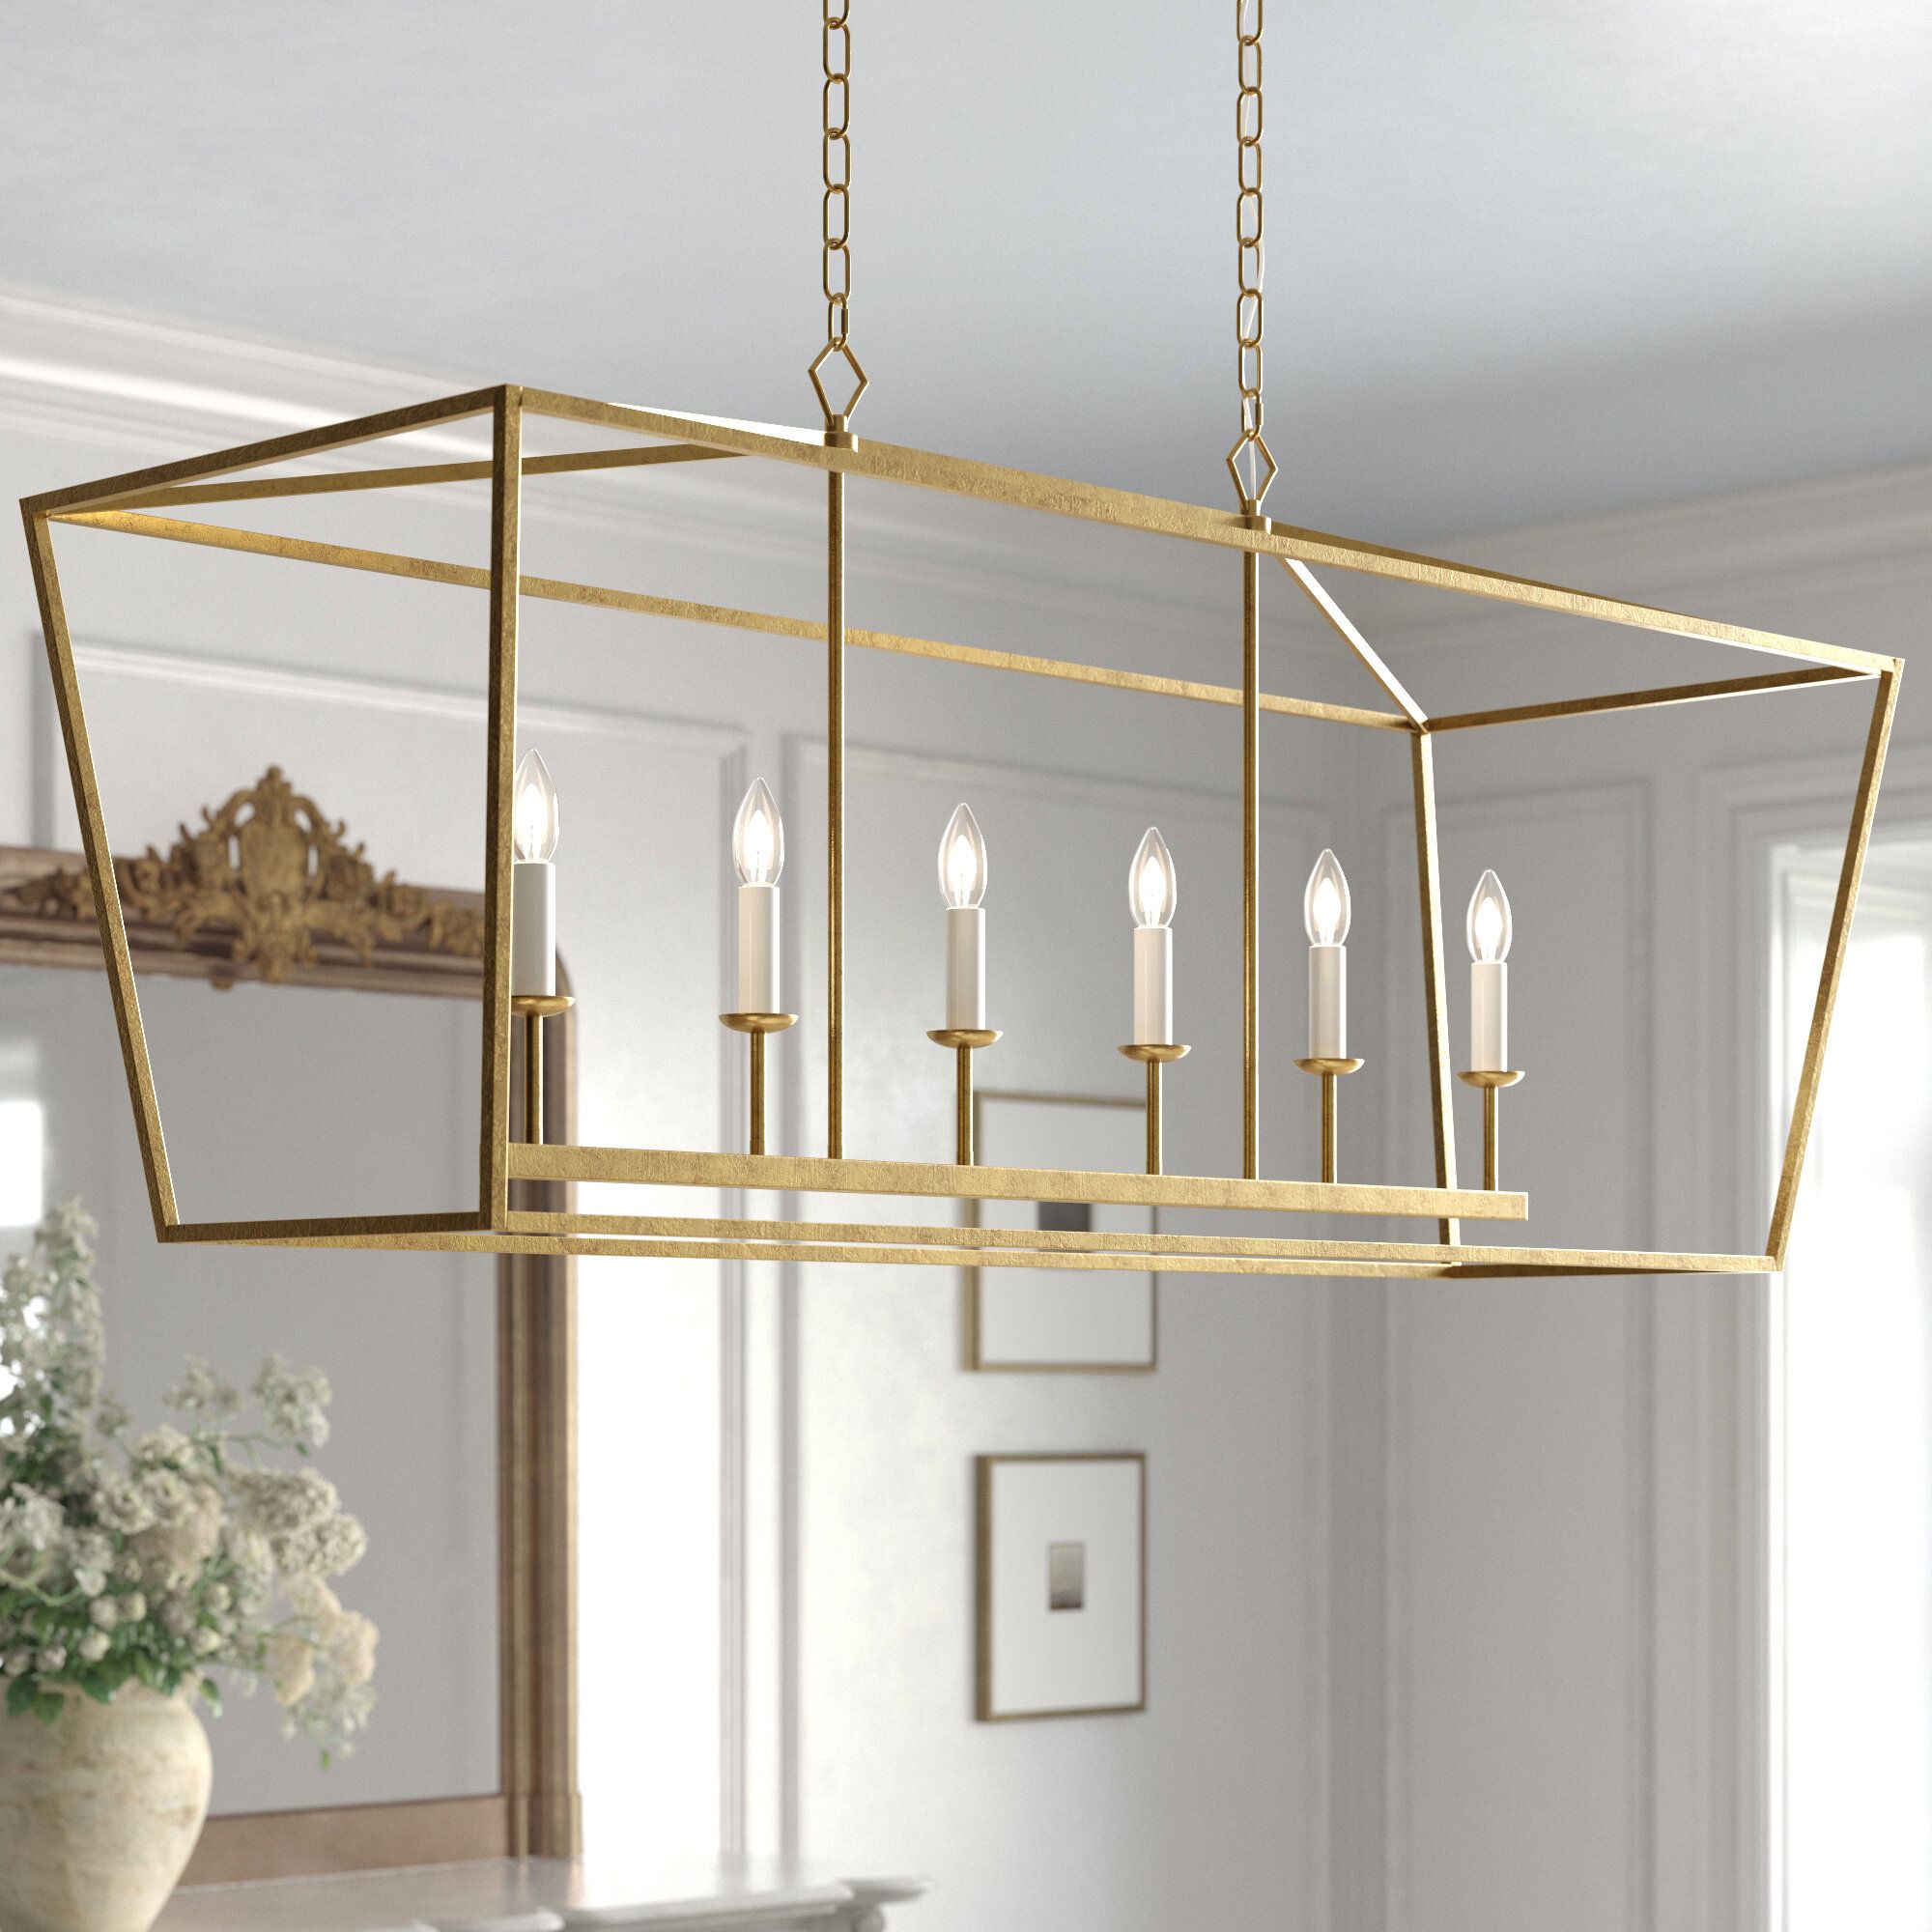 Kelly Clarkson Home Callie H24.7" X L49" X W15“ Cage Large Lantern Iron Art  Design 6 Lights Candle Style Island Chandelier Pendant, Ceiling Light  Fixture Aged Gold & Reviews | Wayfair Pertaining To Gild One Light Lantern Chandeliers (Photo 6 of 15)